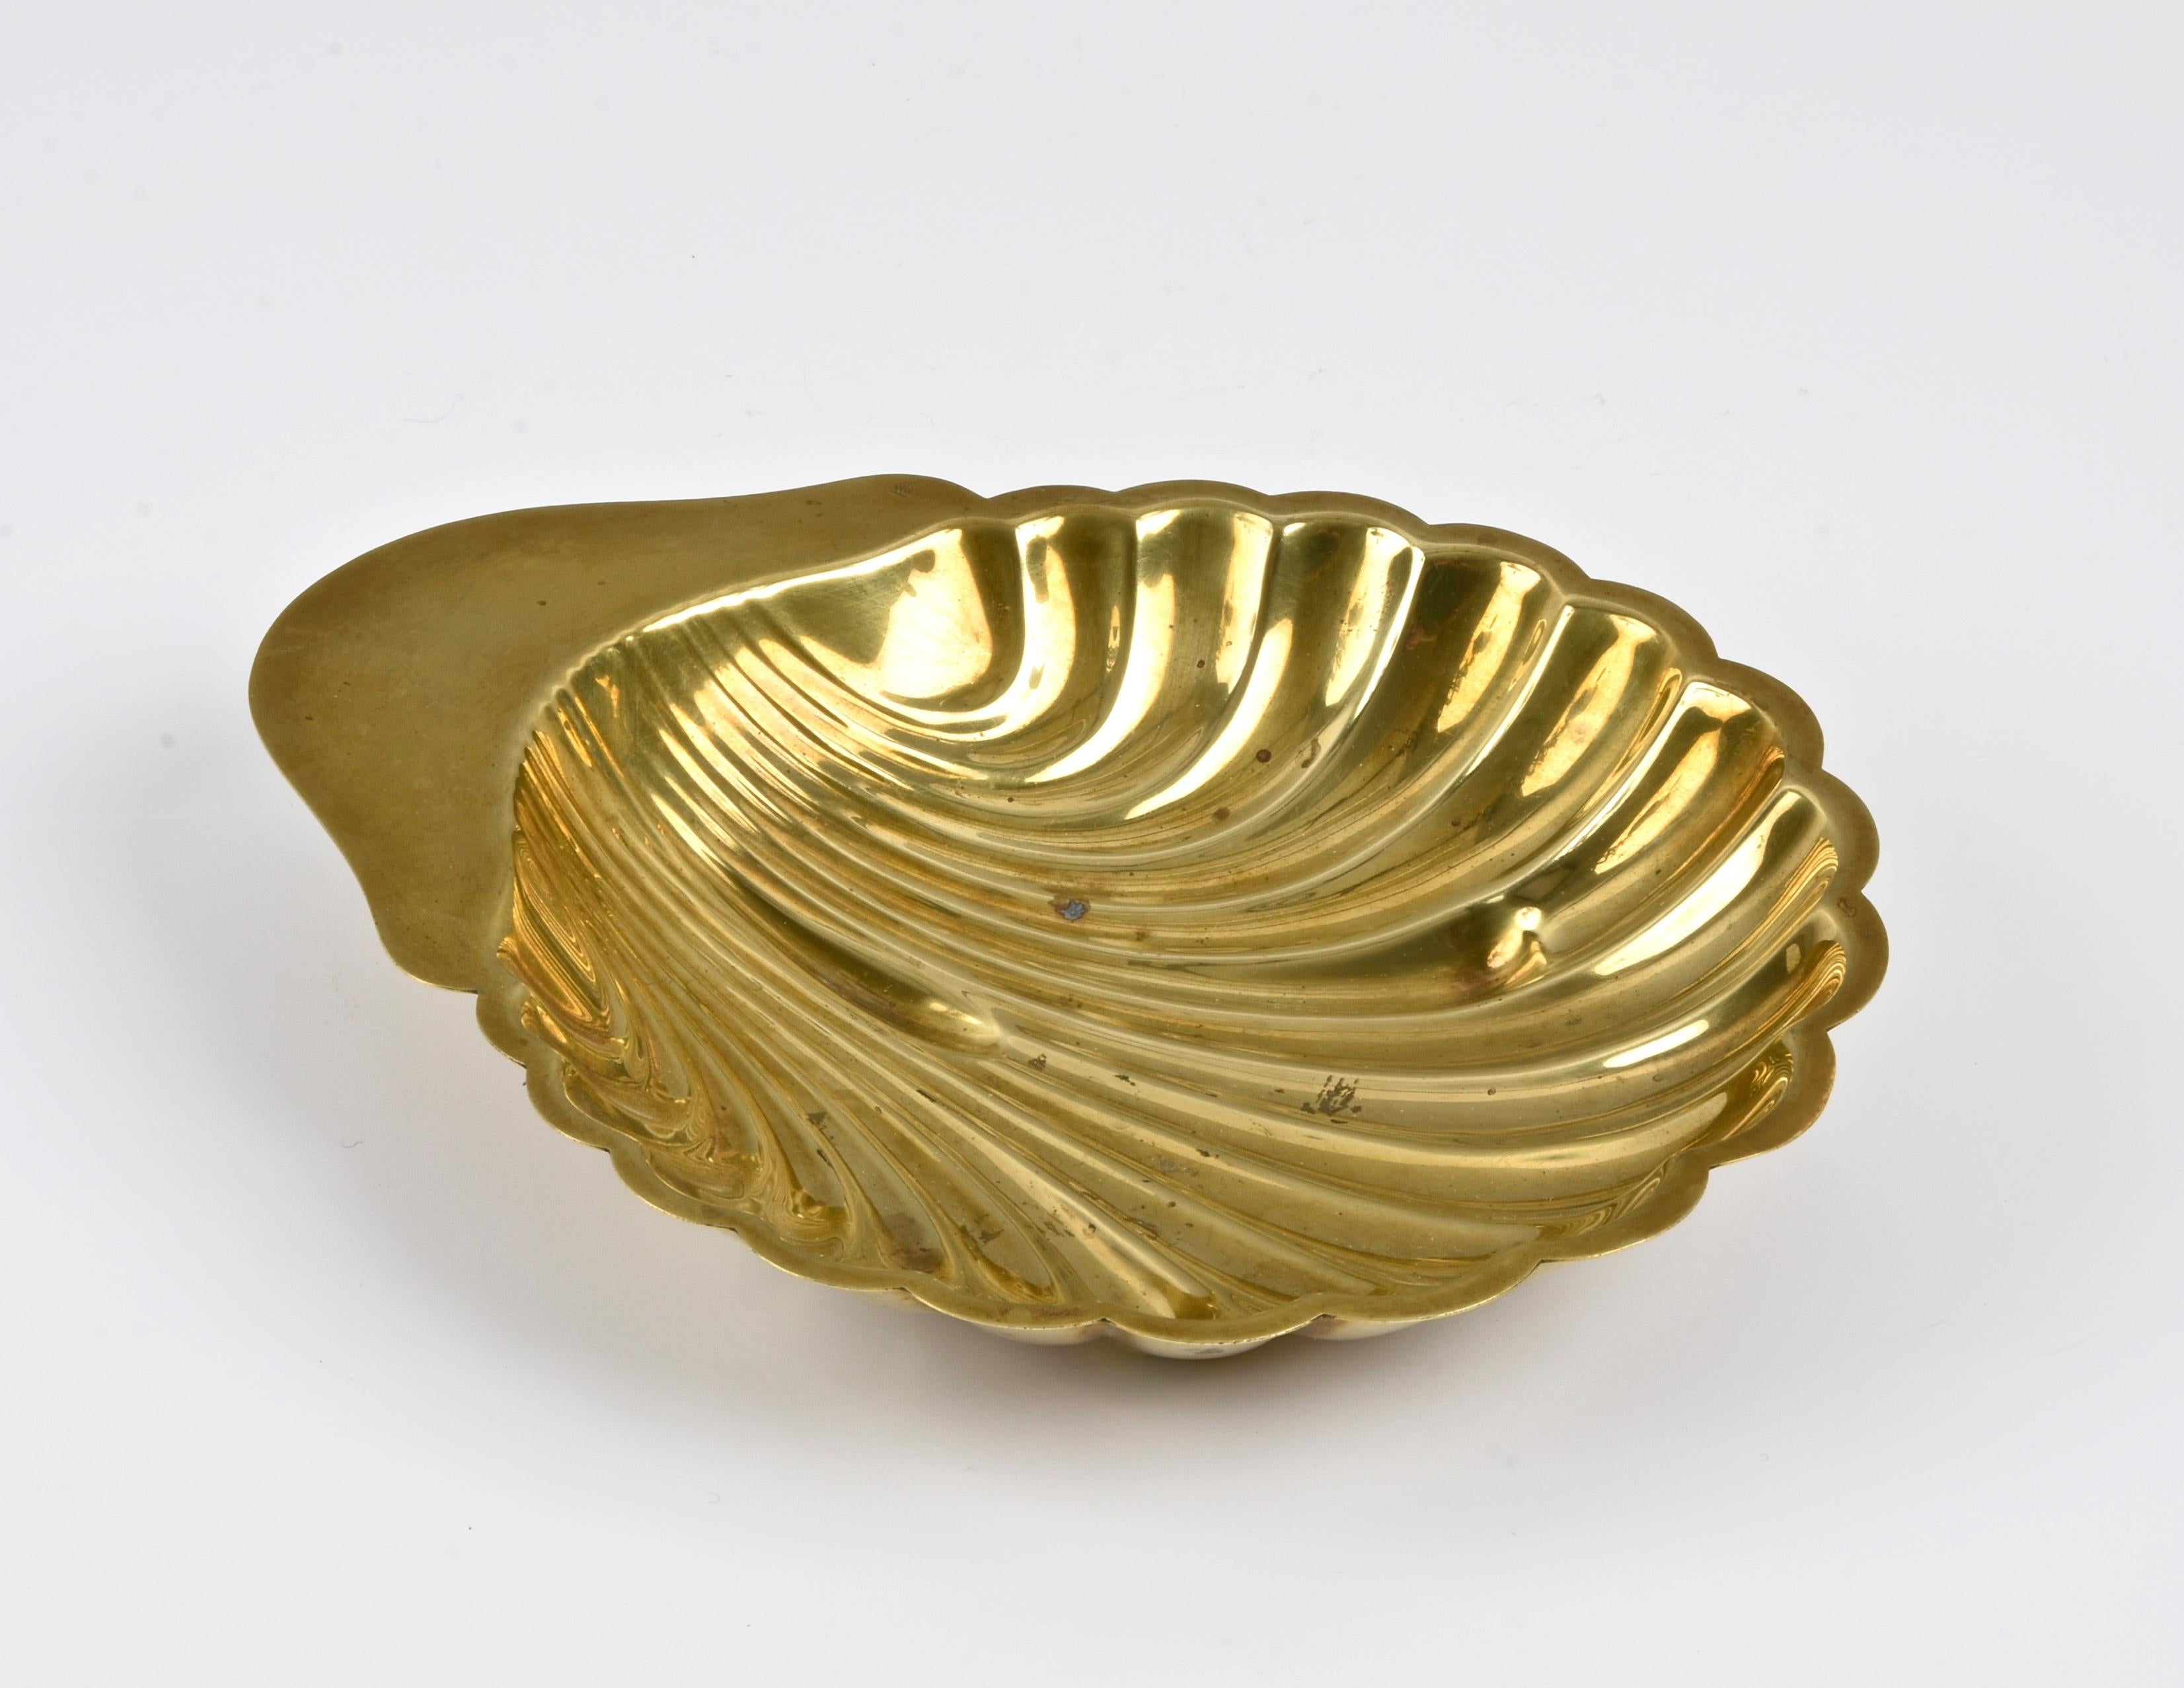 Stunning Italian mid-century shell shaped bowl or ashtray in solid brass. This delightful piece was designed in Italy in the 1970s by Renzo Cassetti Italia.

This charming item features the shape of a shell with incredibly precise details. 

An